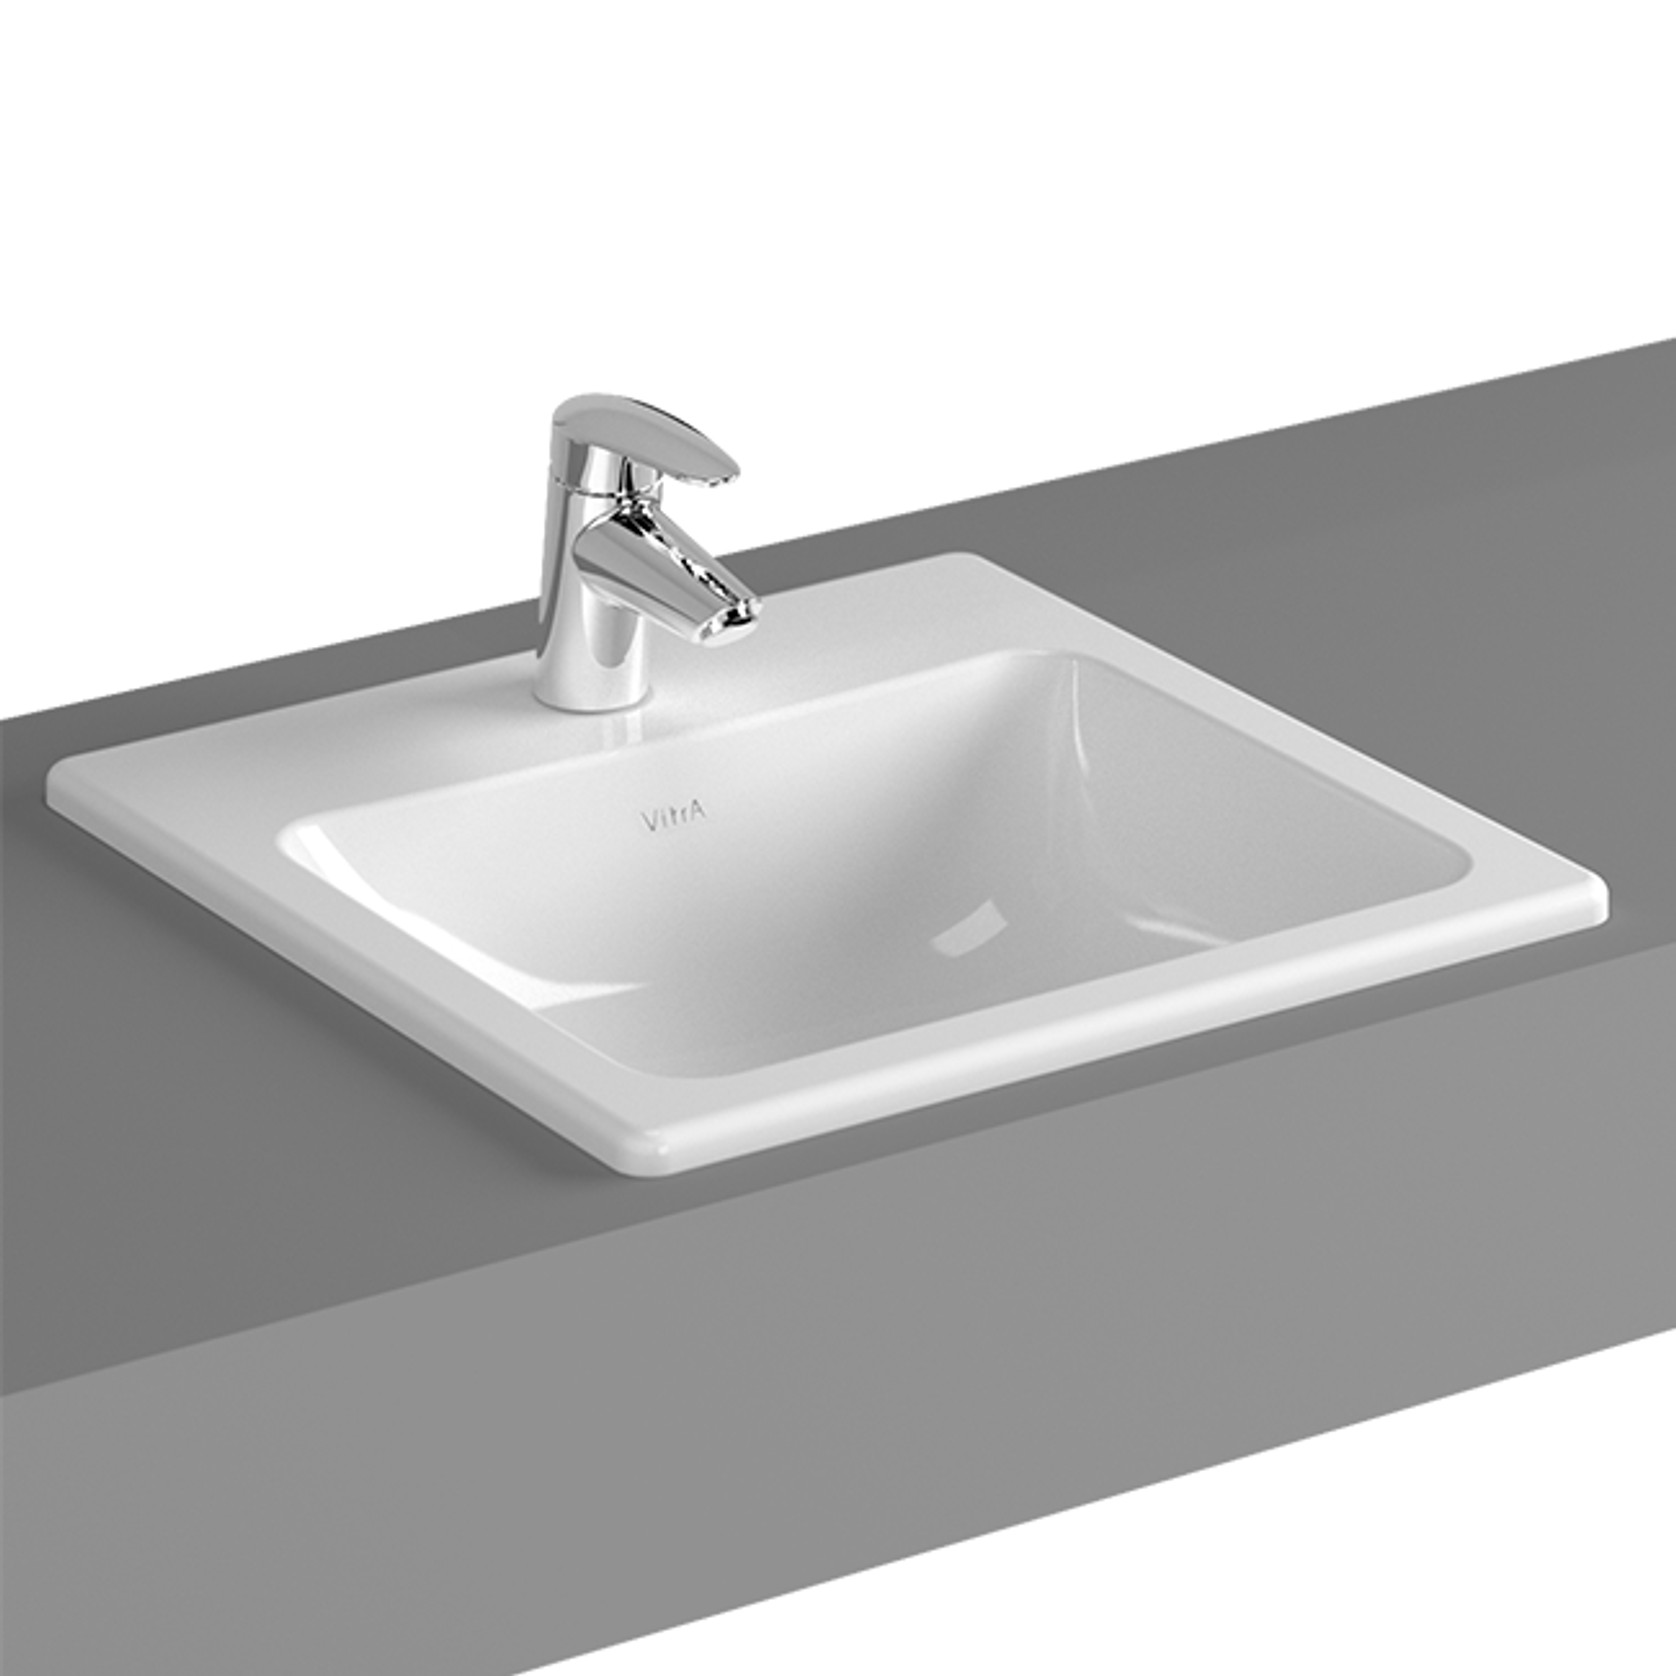 VitrA S20 Inset Washbasin Rectangle 1TH
 gallery detail image